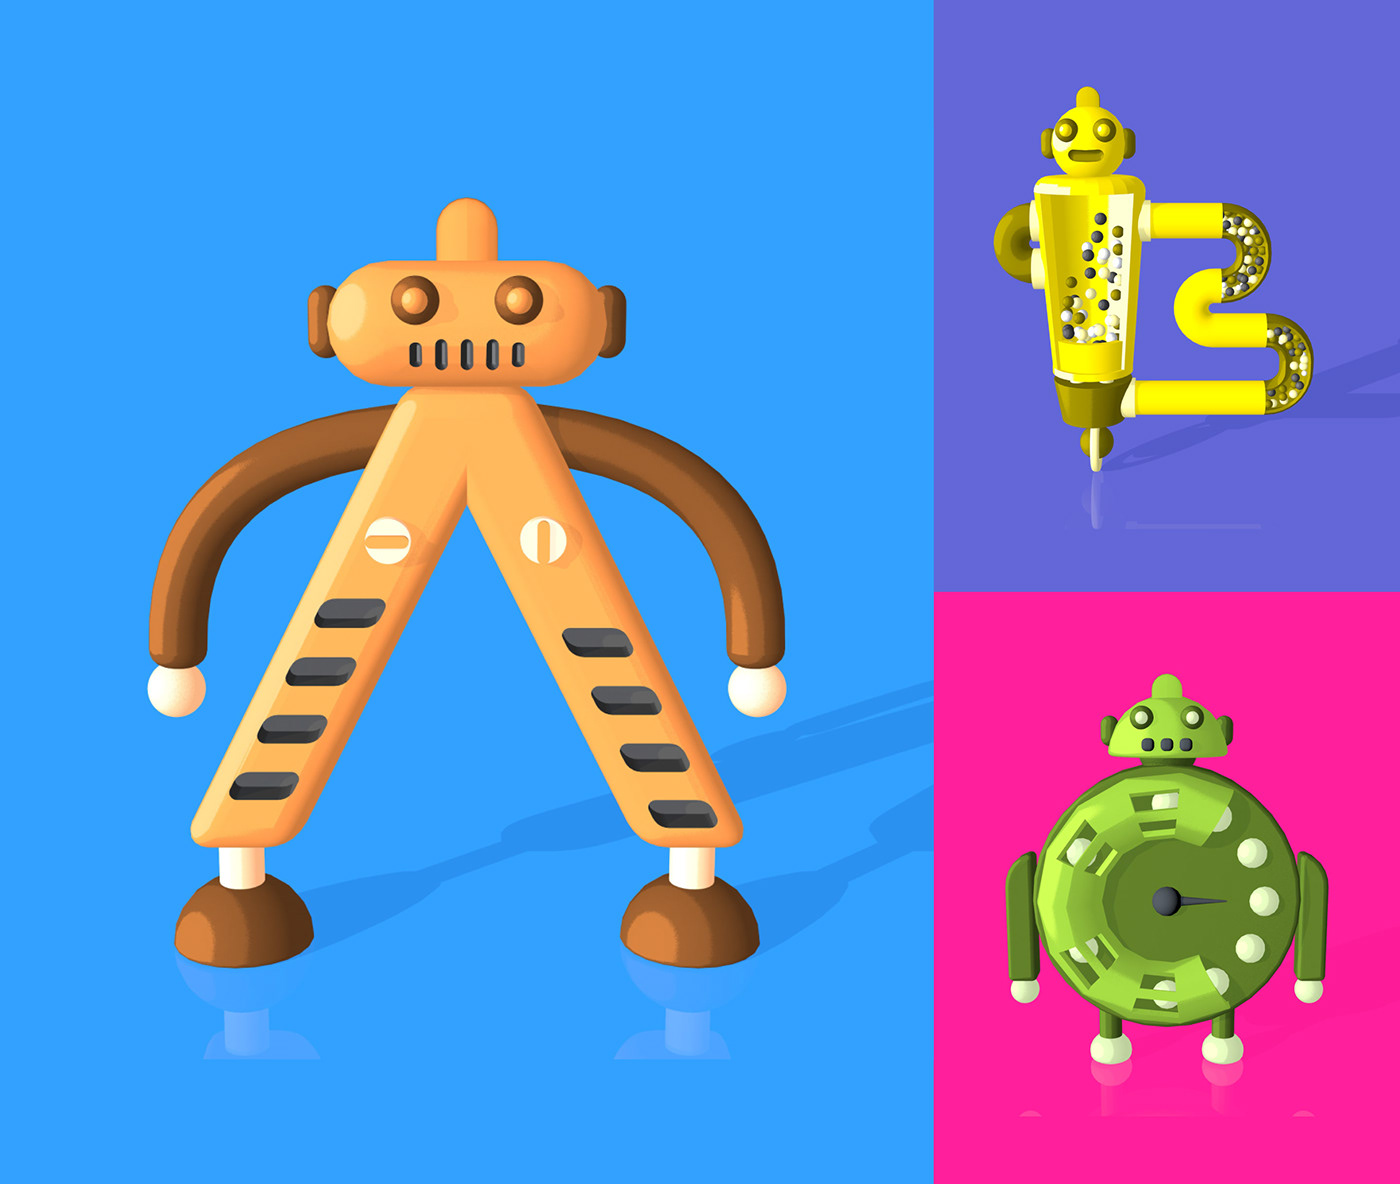 36daysoftype 3dcharacter 3Dillustration animation  c4d characterdesign lettering robot typography   36days